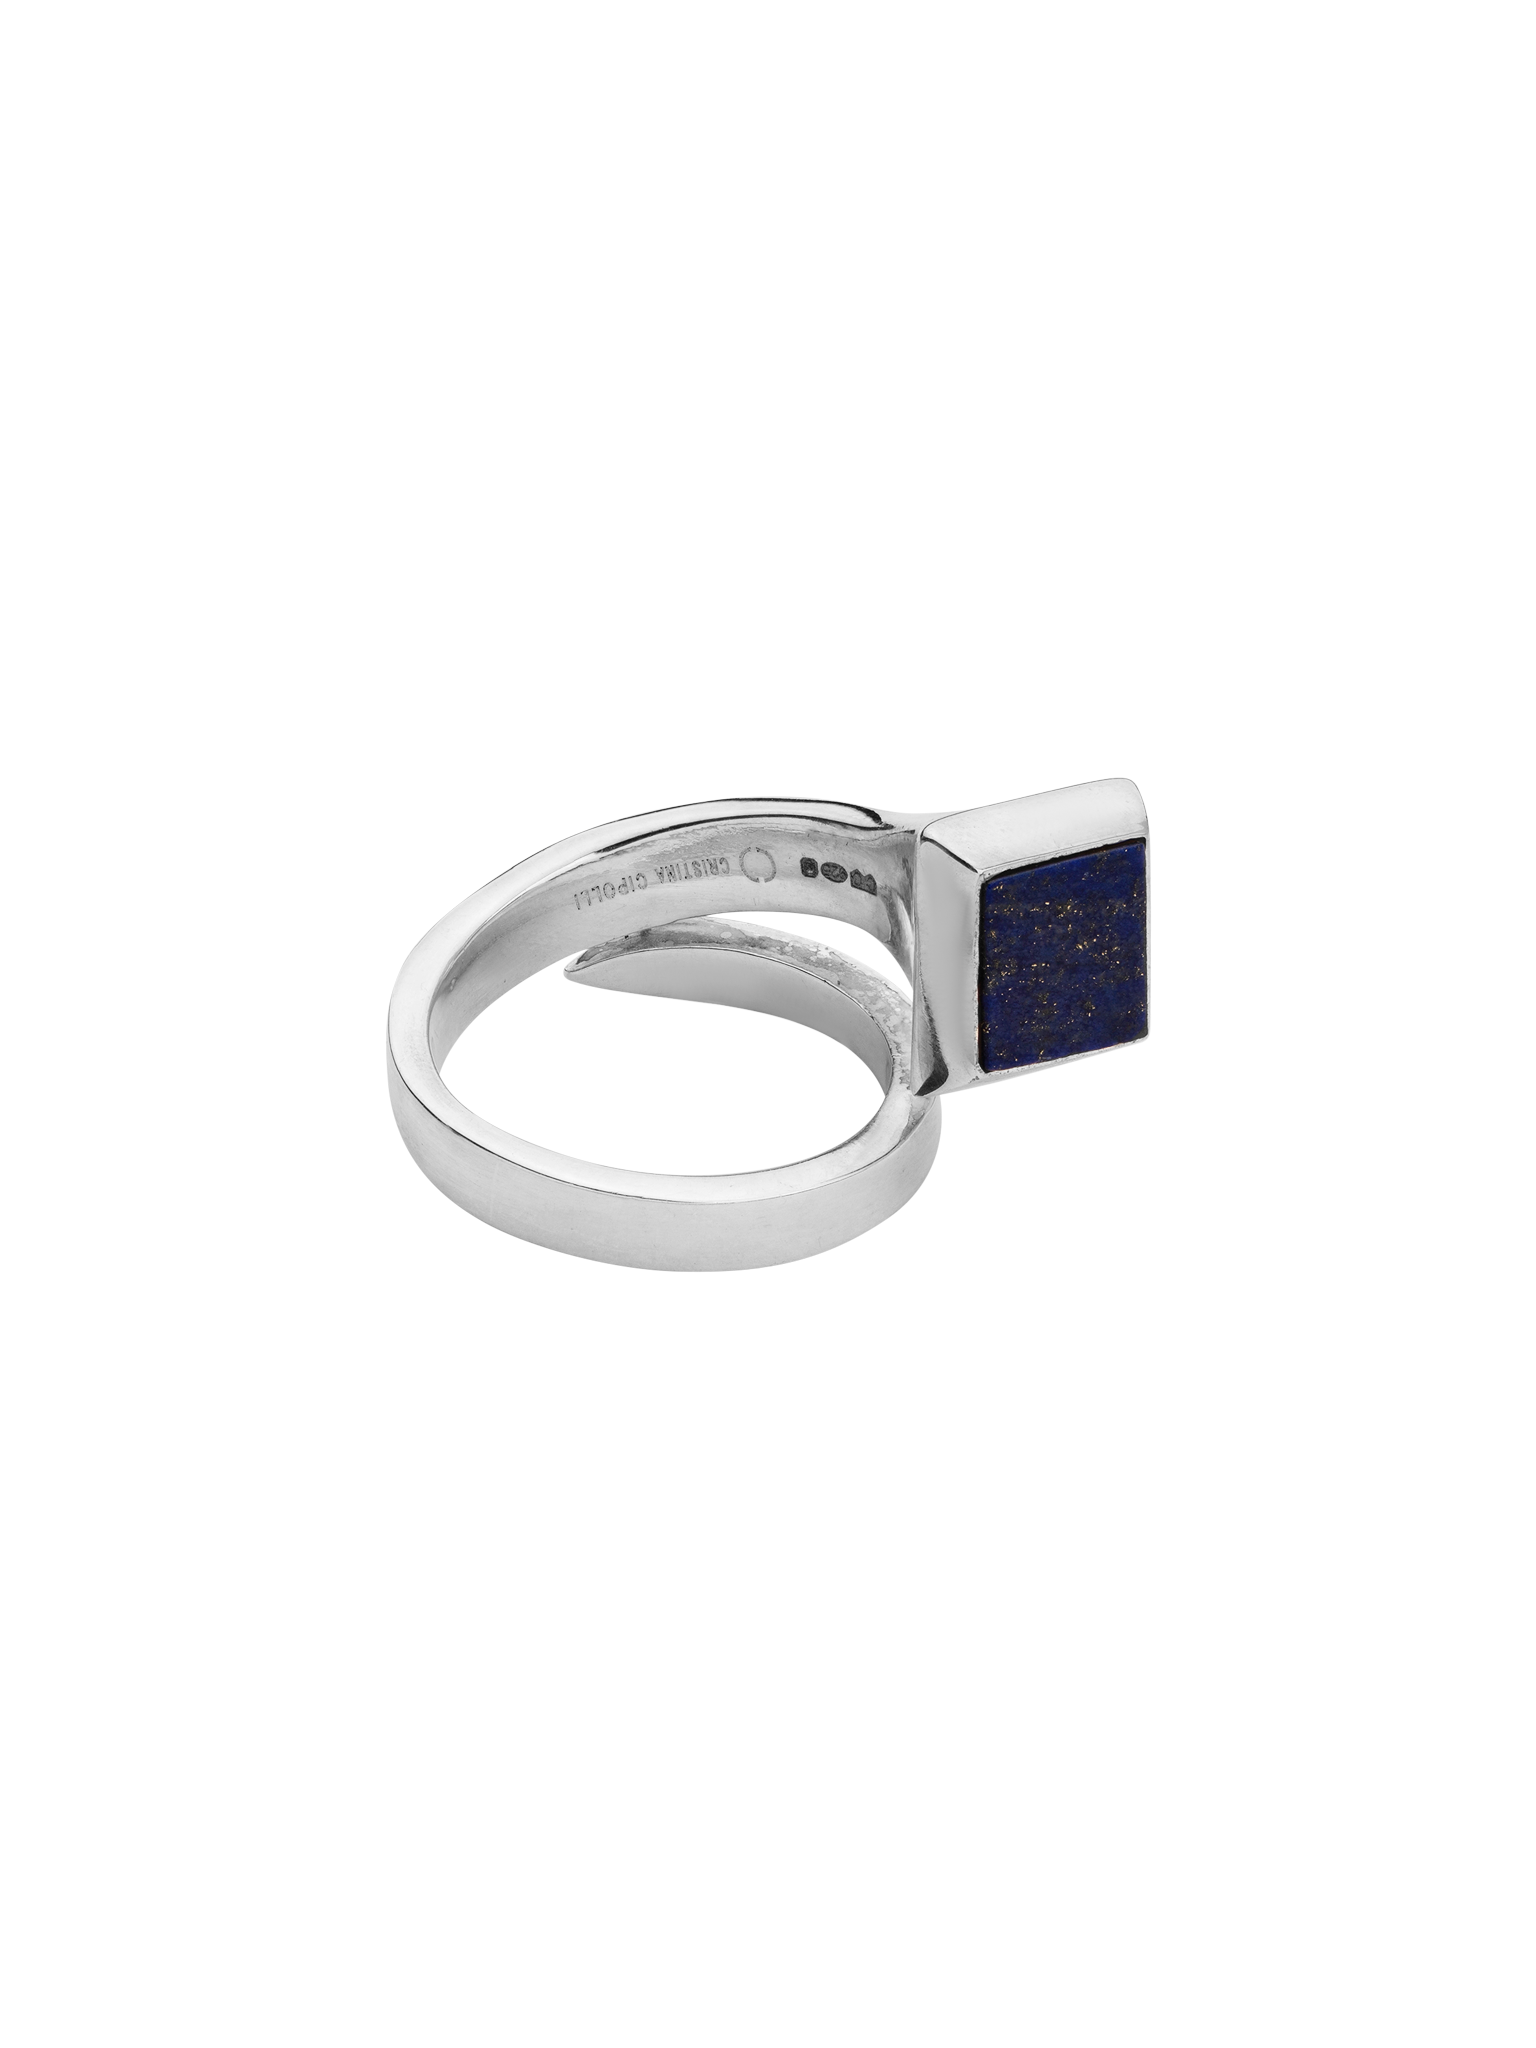 Amazon Ring silver with lapis